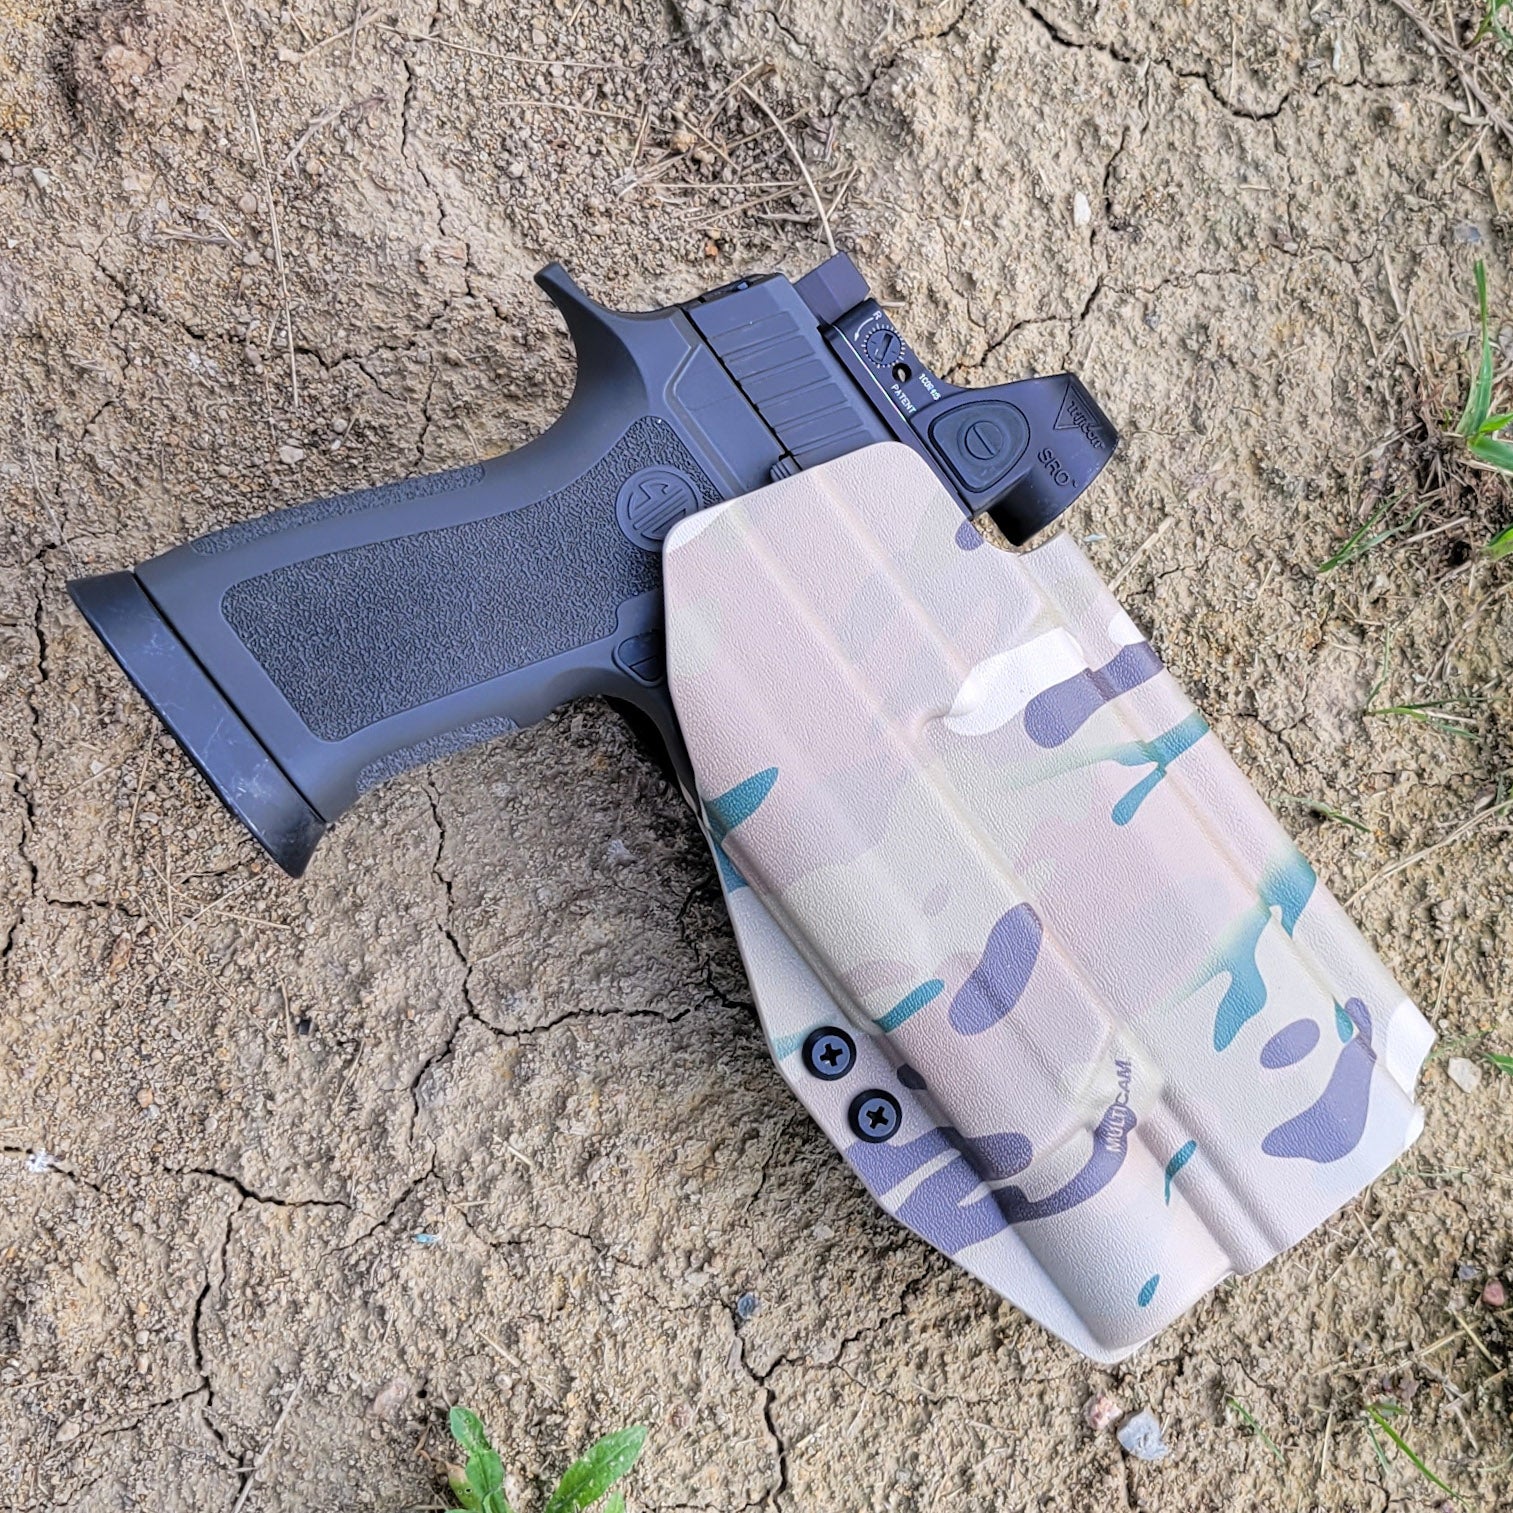 Outside Waistband Kydex Holster designed to fit the Sig Sauer P320 Full Size, M18, M17, X-Five, and Carry pistols with the Surefire X300U-A or X300U-B light & GoGuns USA Gas Pedal mounted to the pistol. Cleared for red dot sights and front suppressor height sights up to 3/8 tall.  Made in the USA